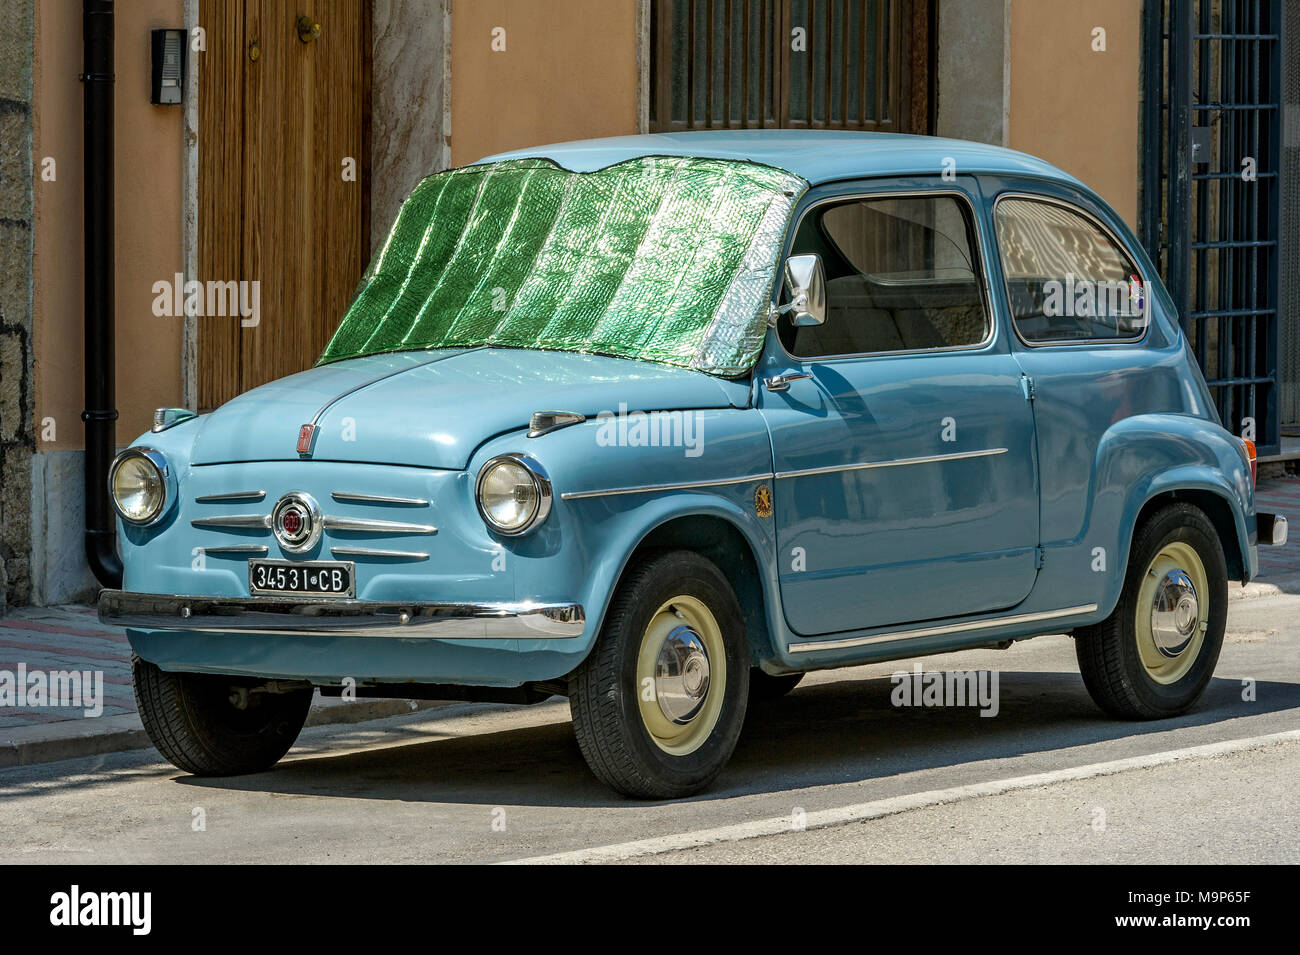 https://c8.alamy.com/comp/M9P65F/blue-fiat-600-seicentooldtimer-with-sun-protection-on-windscreen-molise-italy-M9P65F.jpg